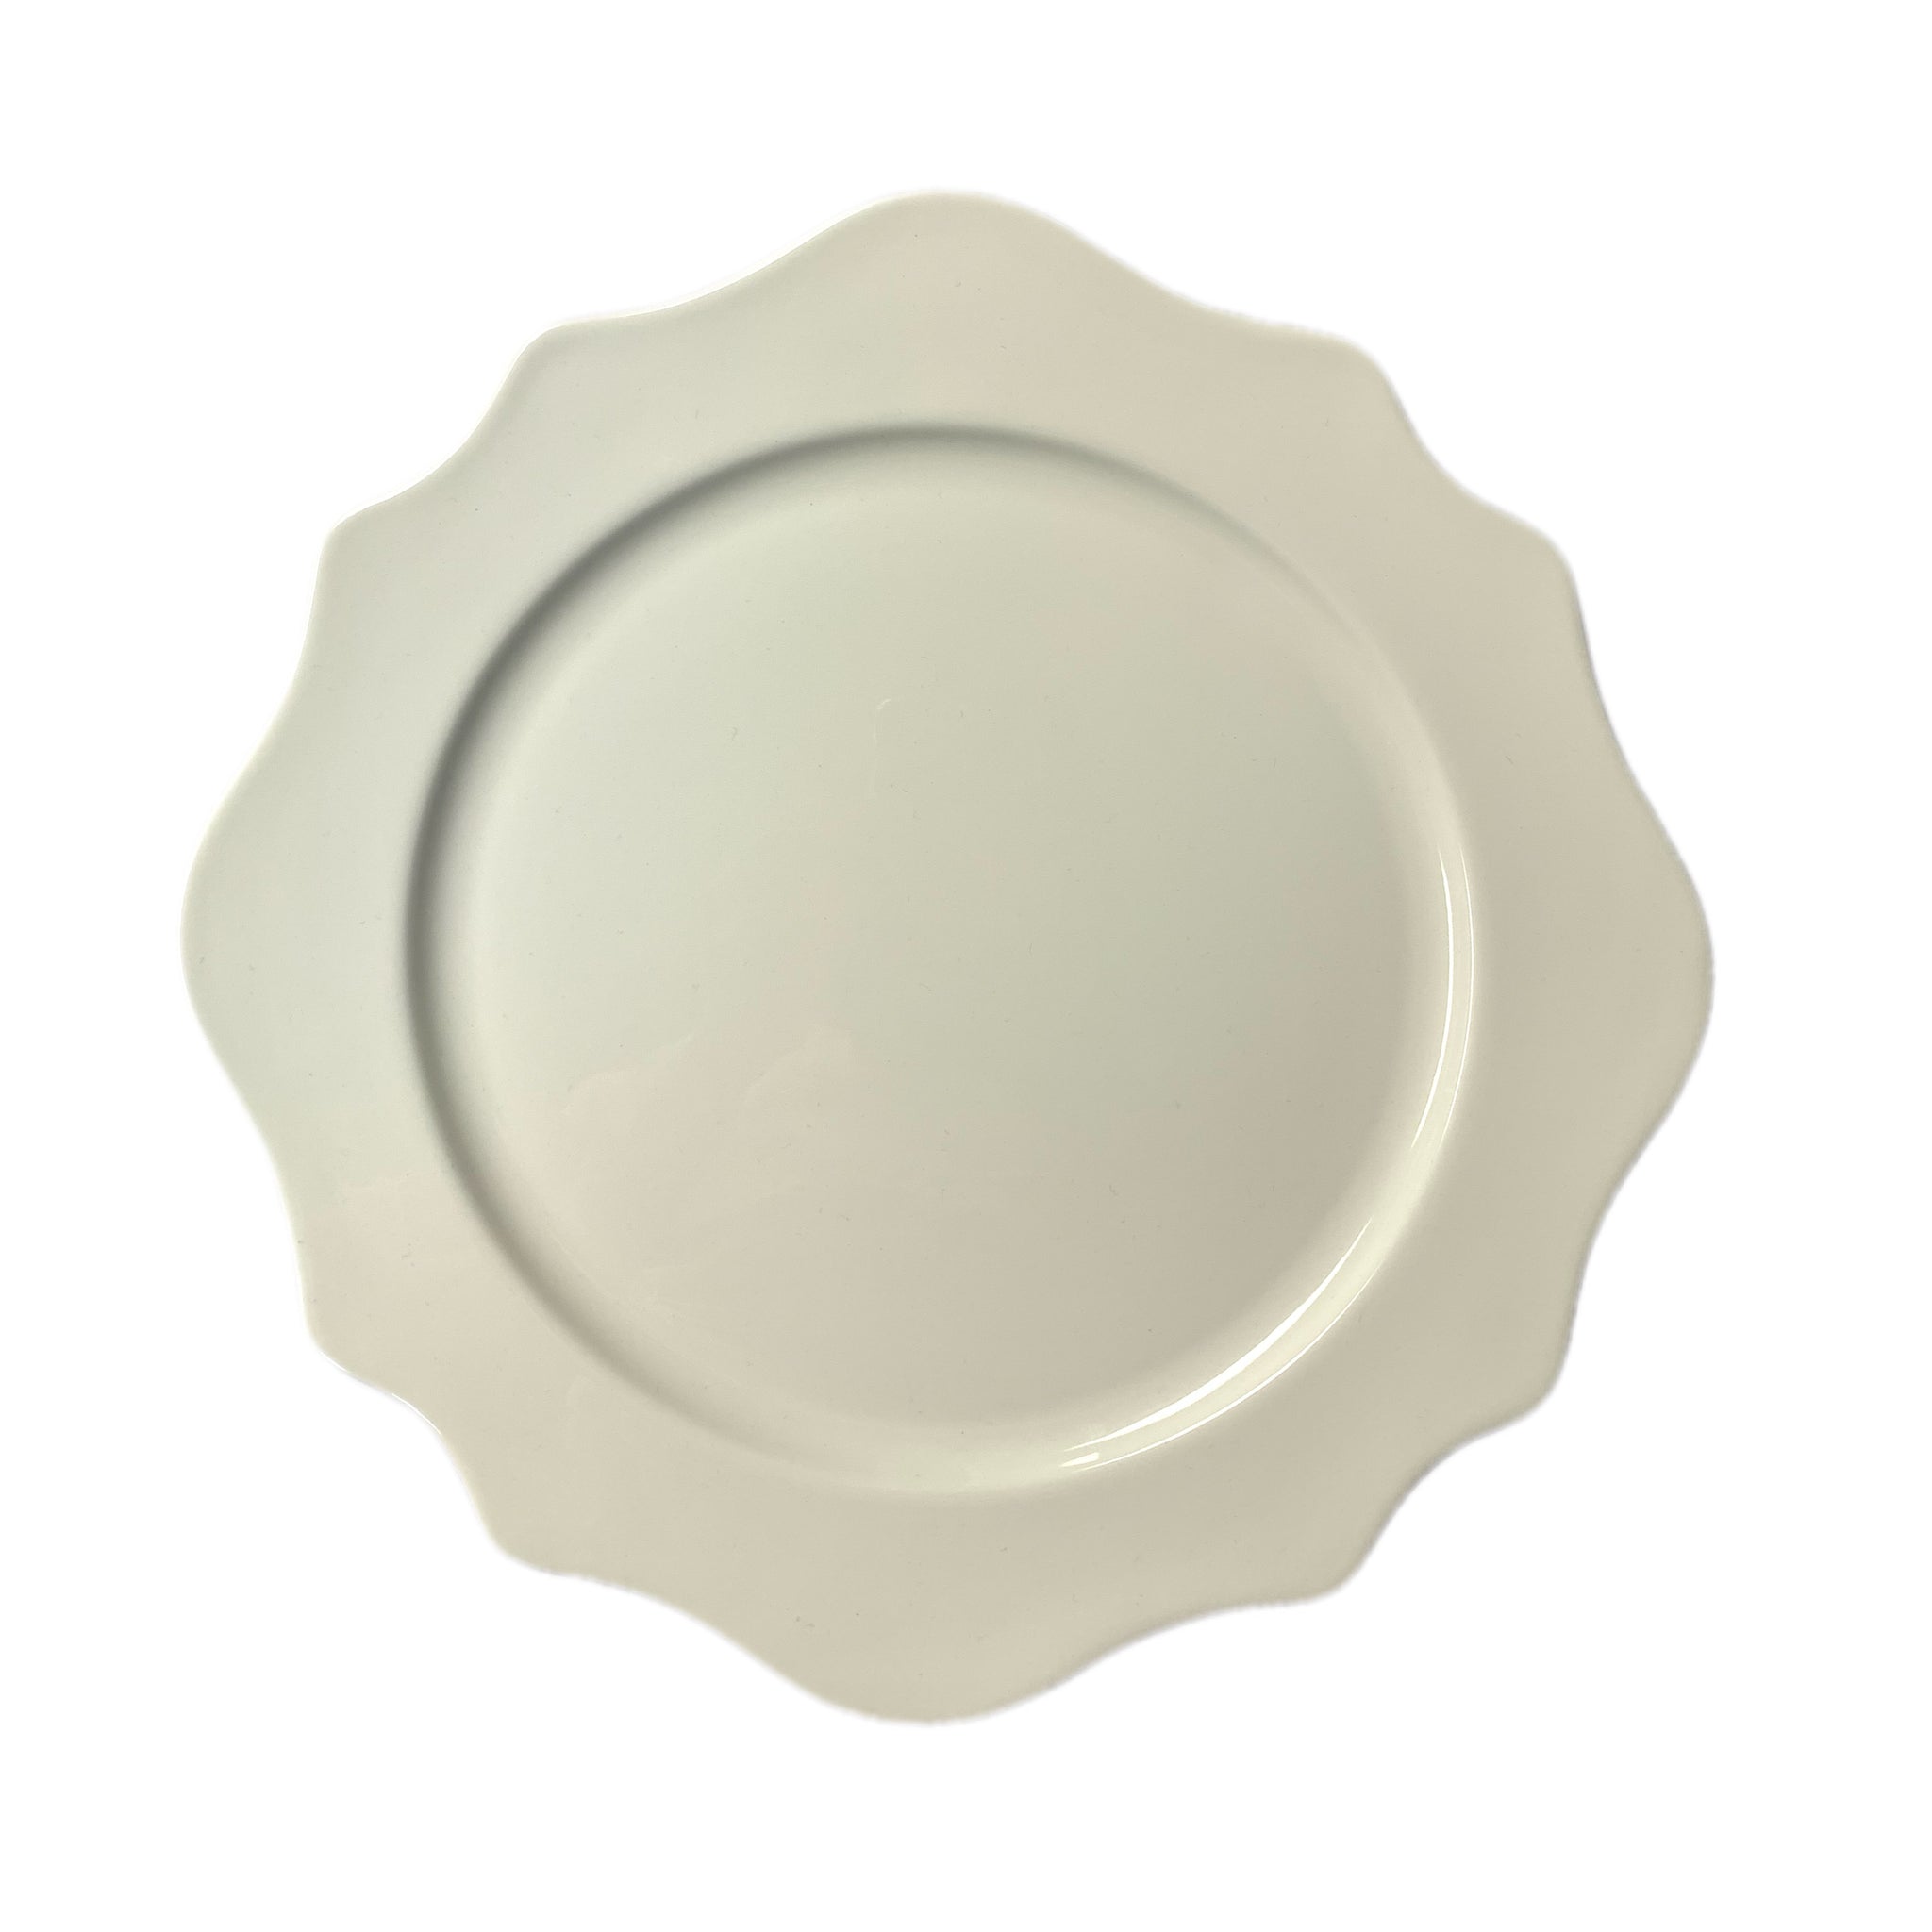 Venice White Charger Plates